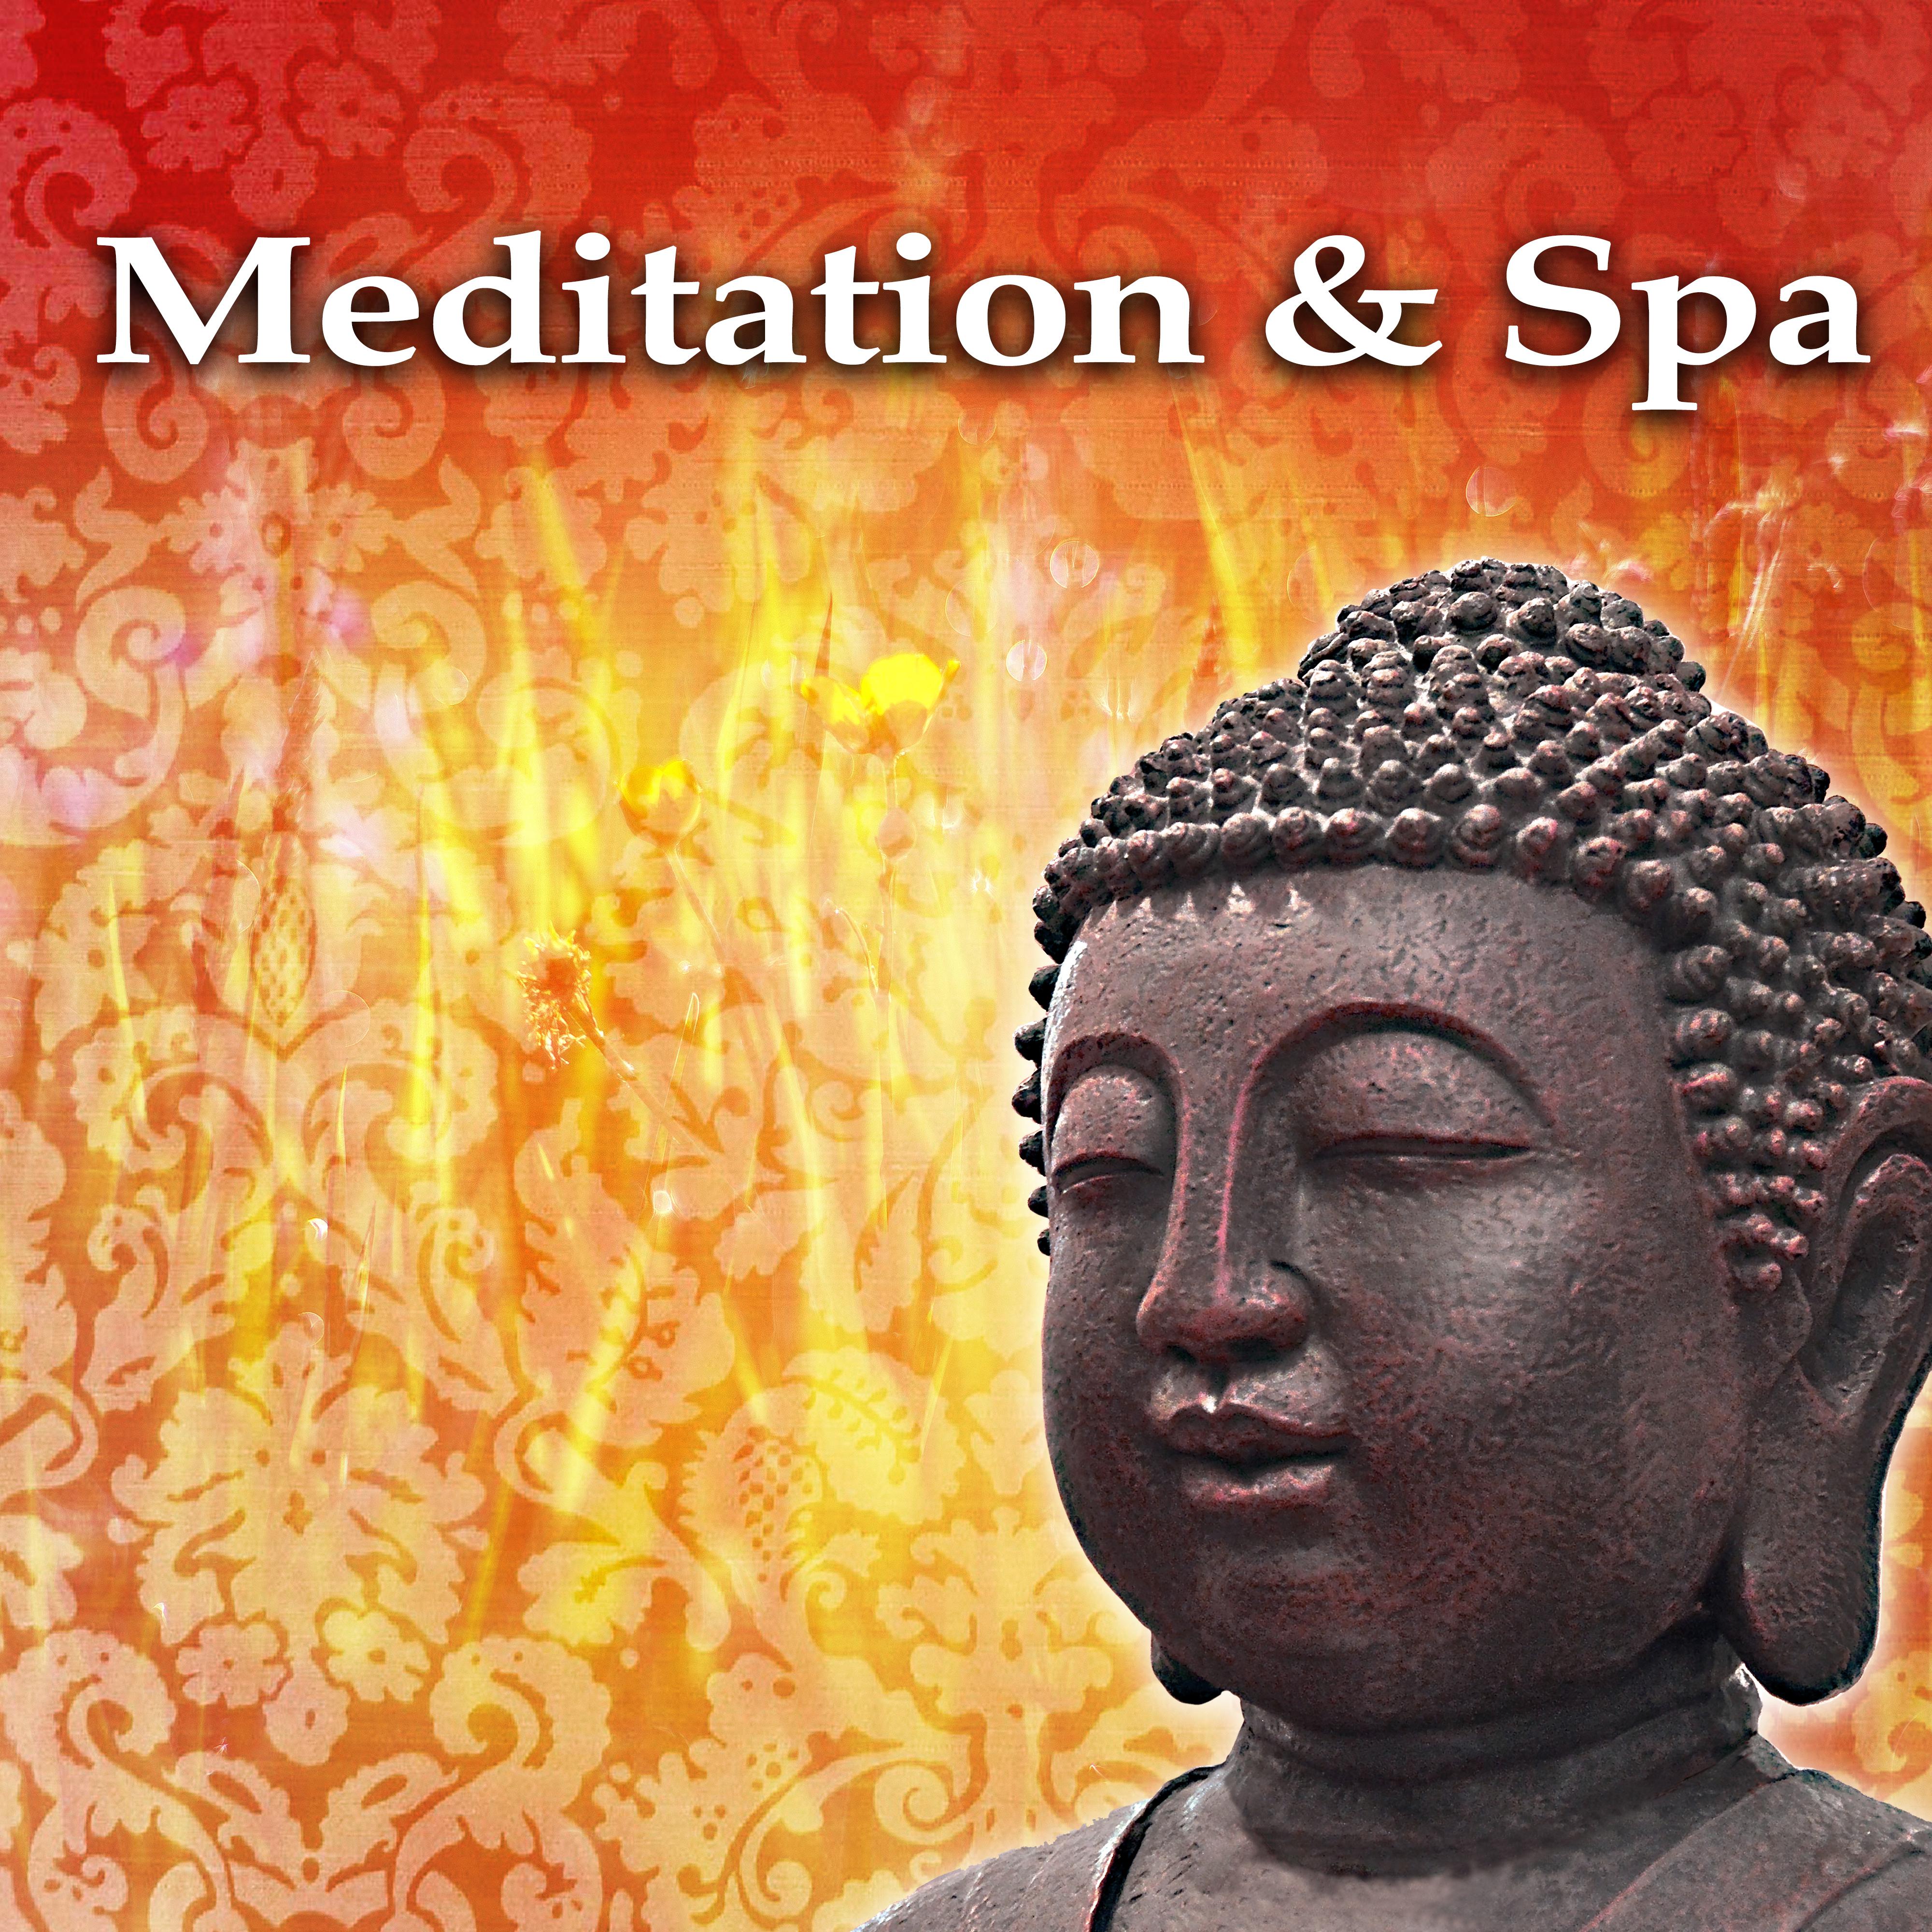 Meditation  Spa  Reiki Sounds, Songs for Yoga, Meditation, Soothing Melodies for Relaxation